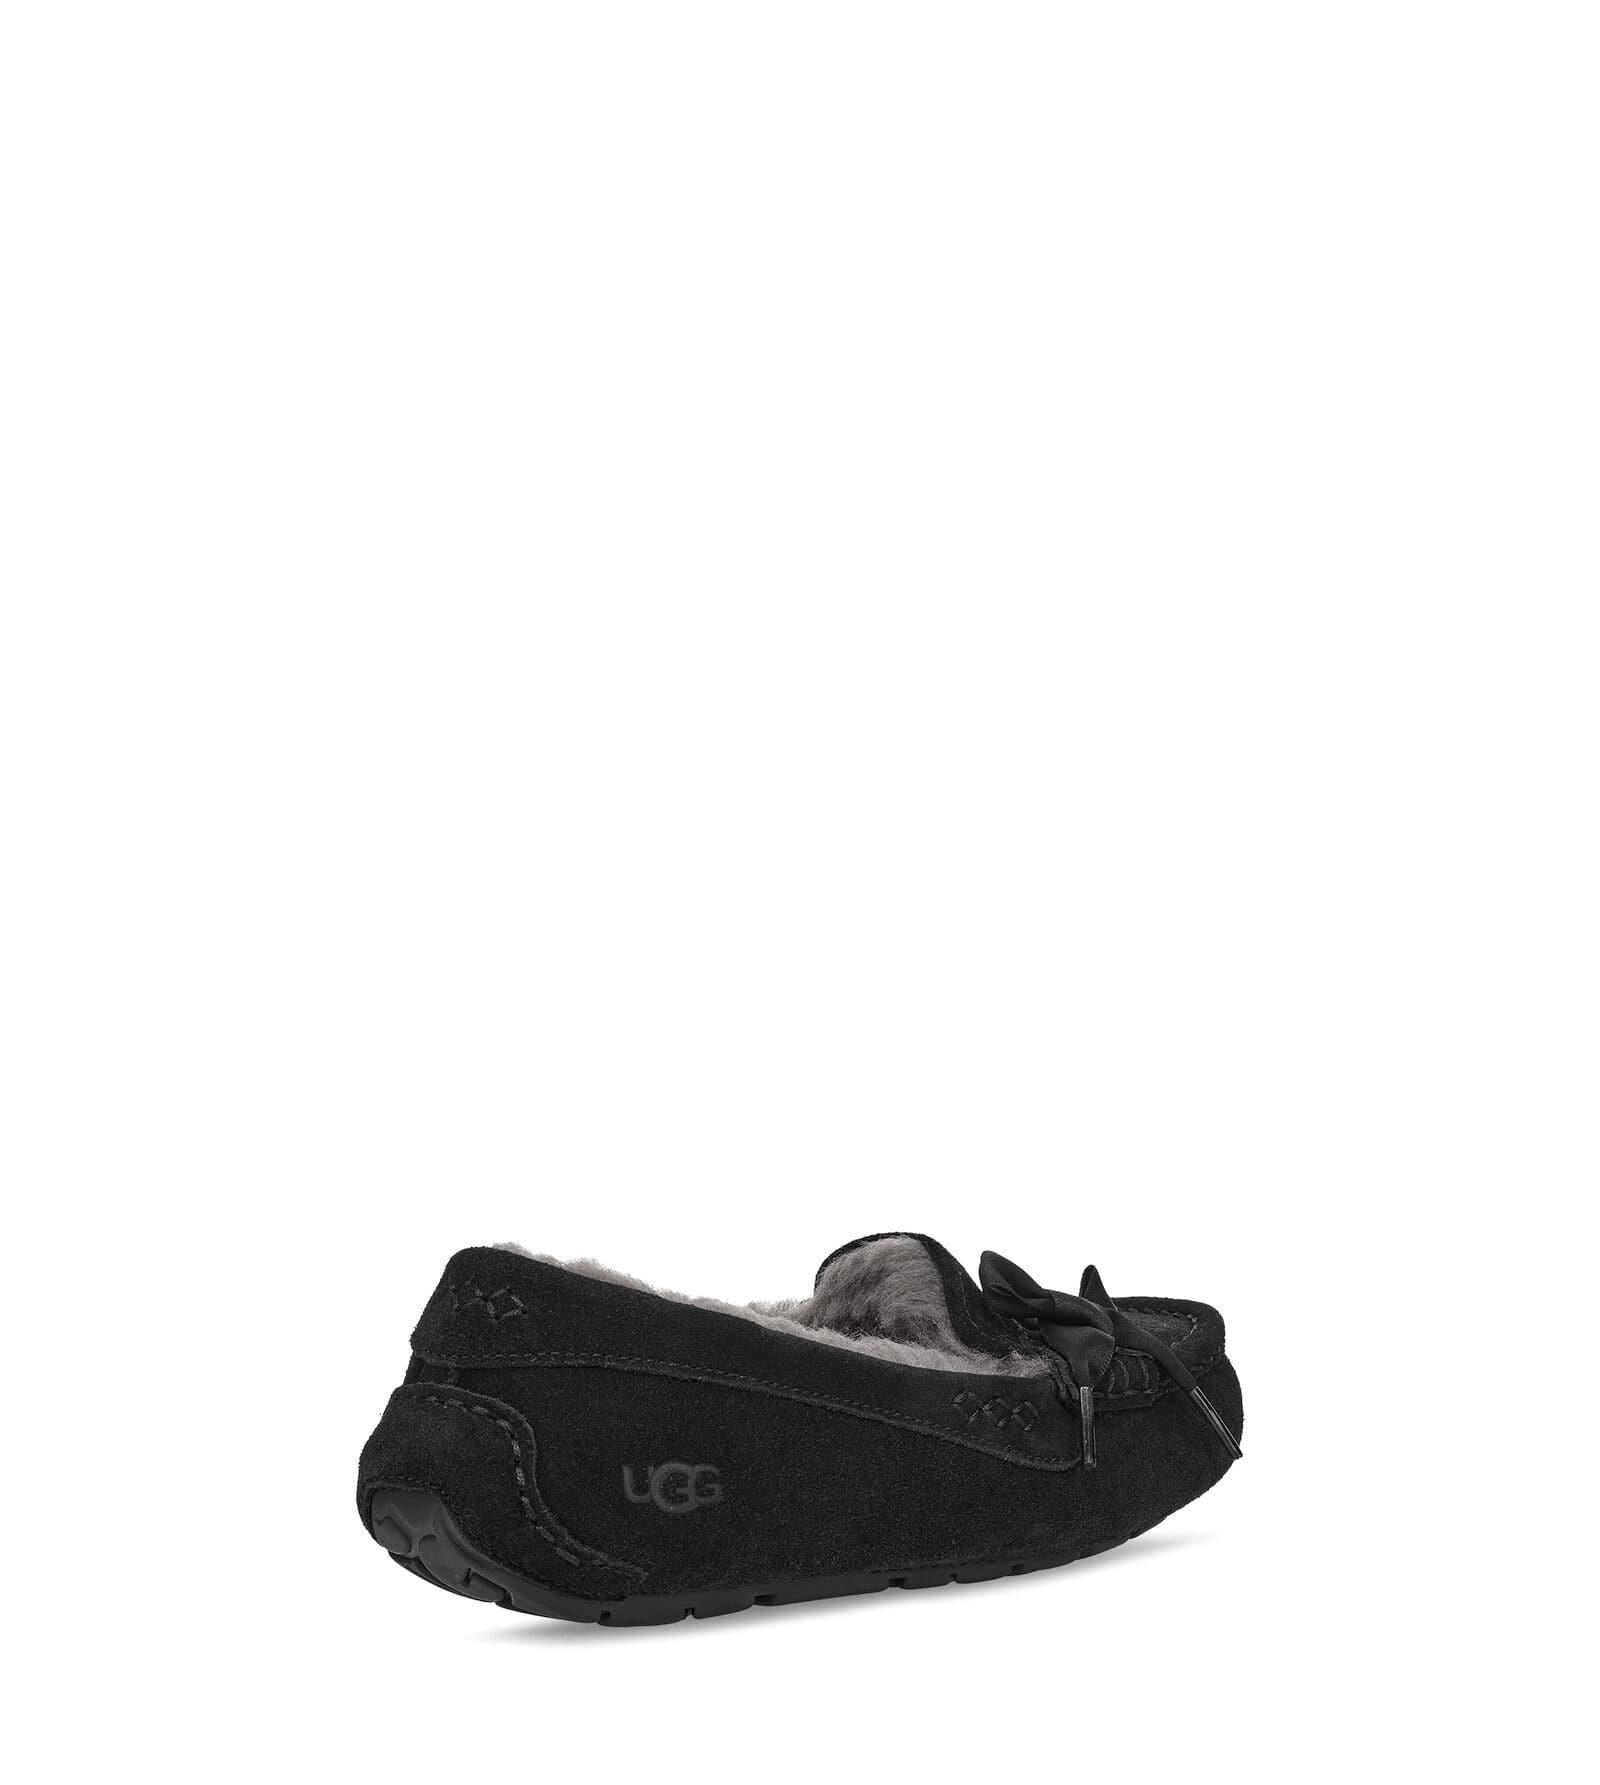 ansley lace ugg slippers